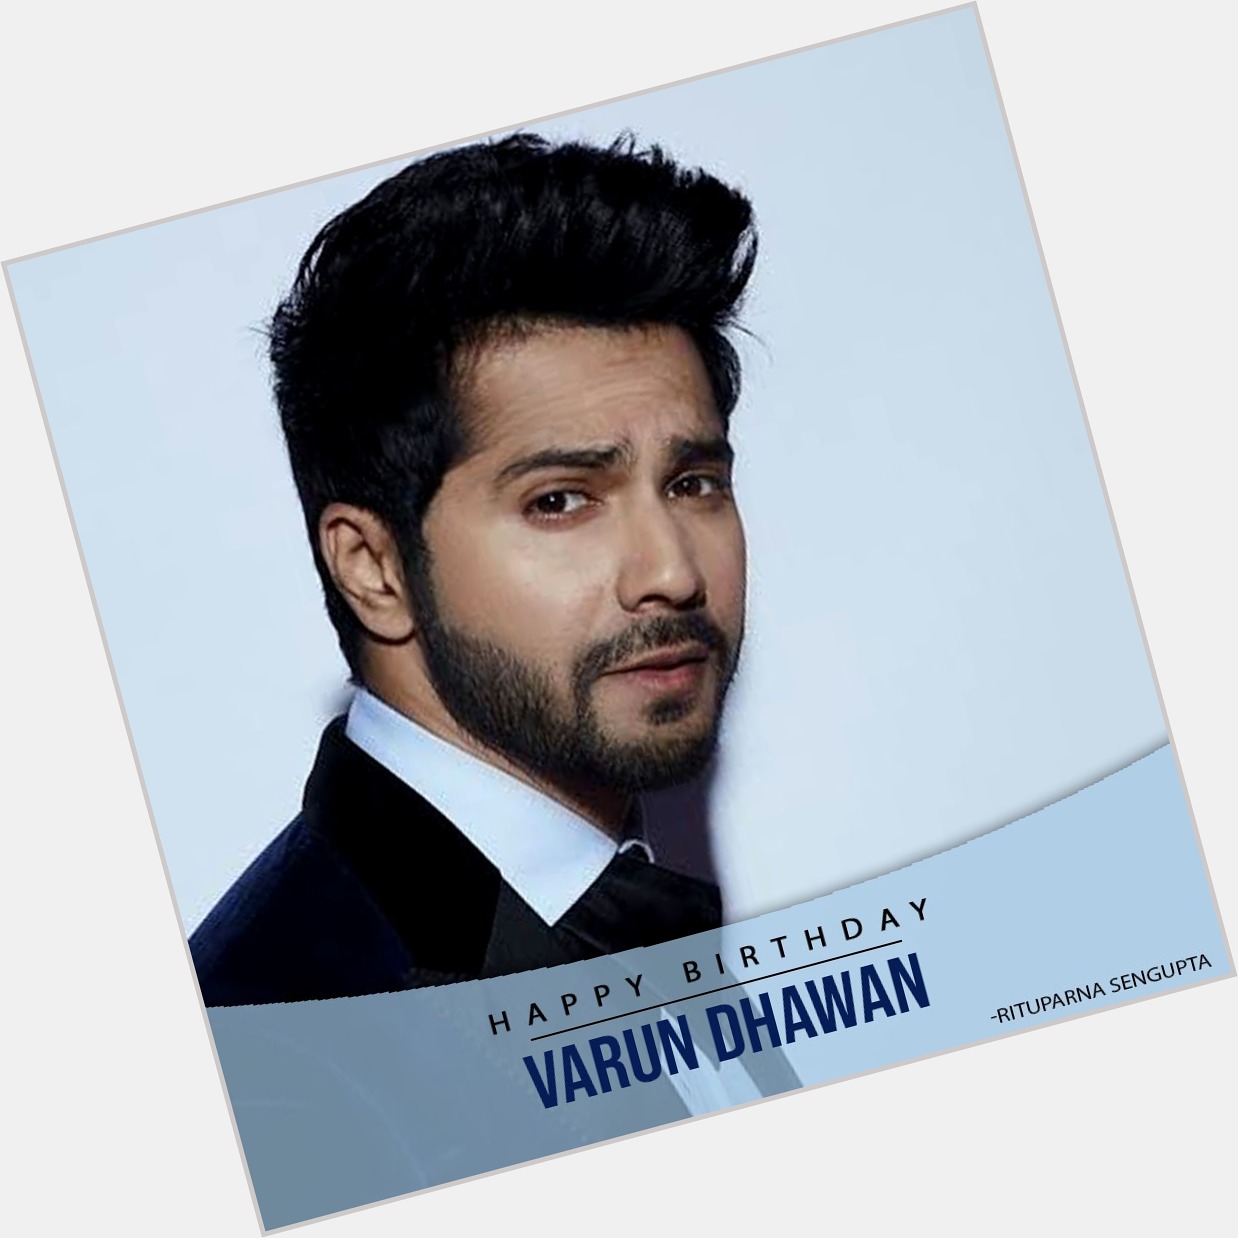 Wishing the very talented actor, Varun Dhawan a very Happy Birthday! 
Keep Shining & stay blessed!   